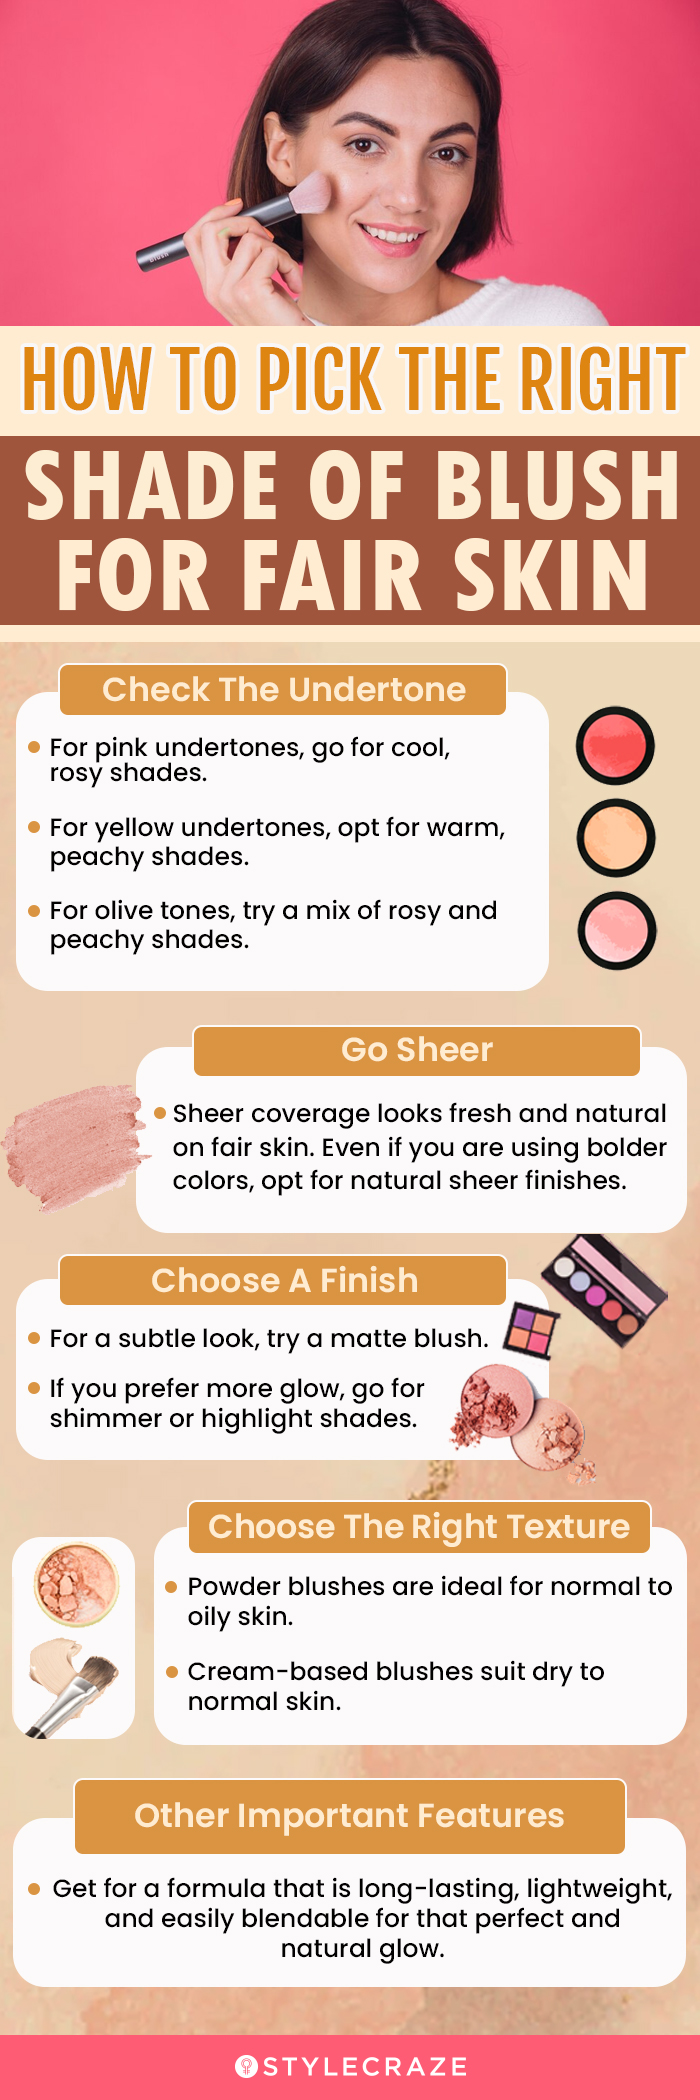 How To Pick The Right Shade Of Blush For Fair Skin [infographic]